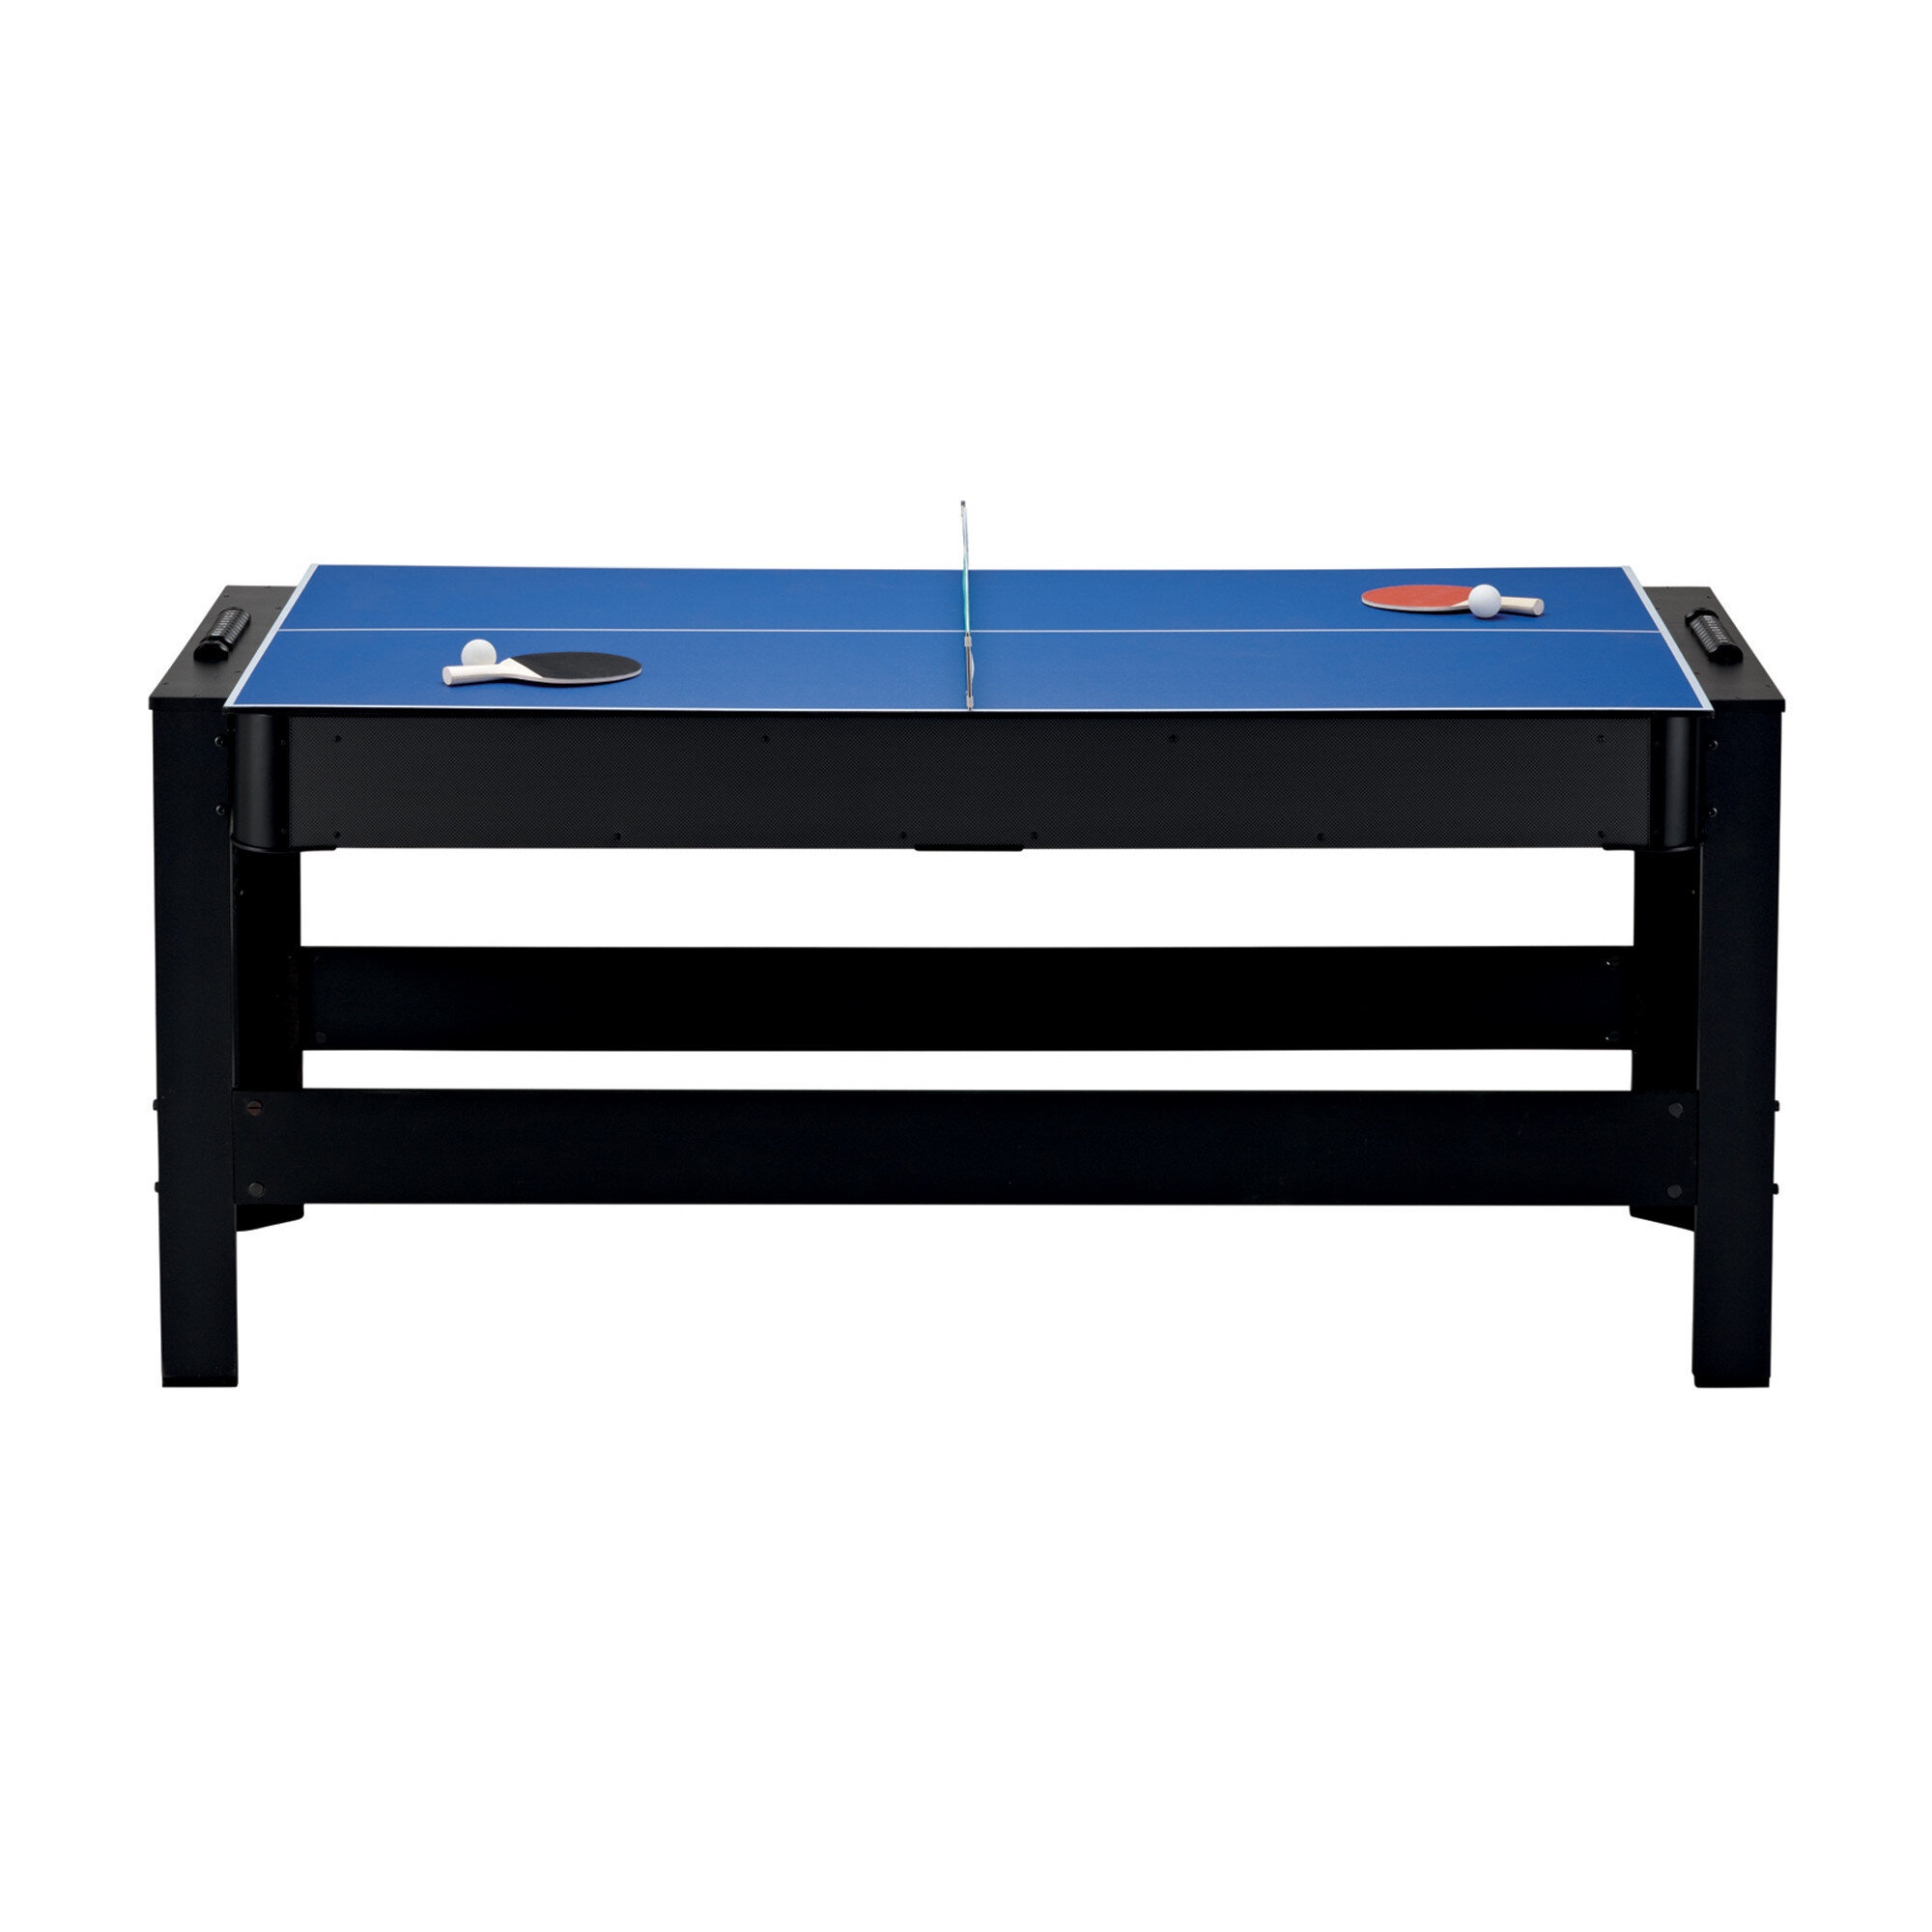 The Four Square Table Tennis Game - Hammacher Schlemmer